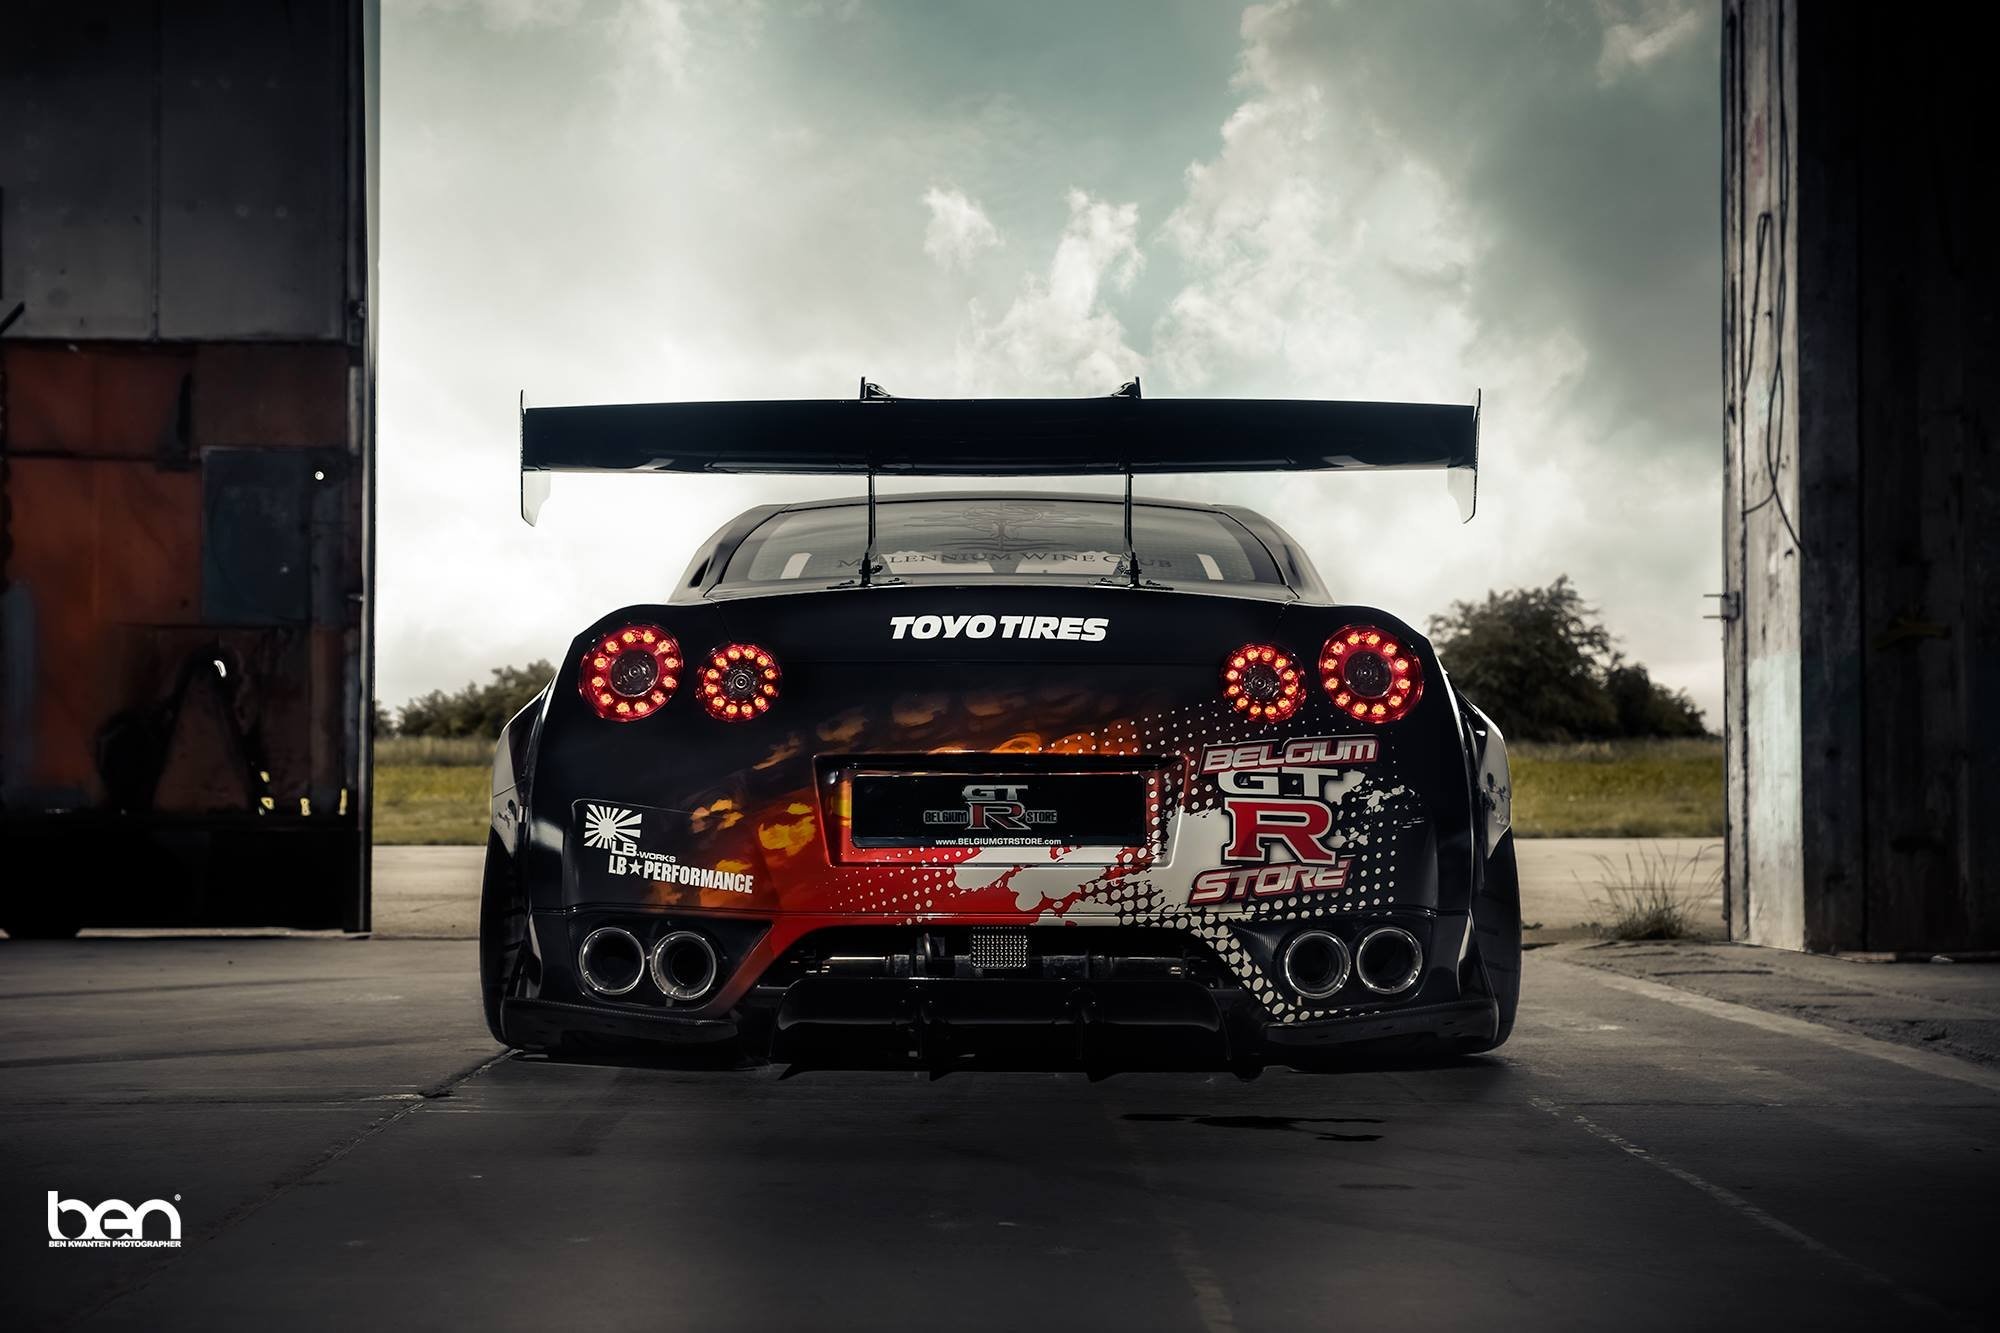 2000x1333 Liberty Walk Nissan Gt R PC, Android, iPhone and iPad. Wallpapers .